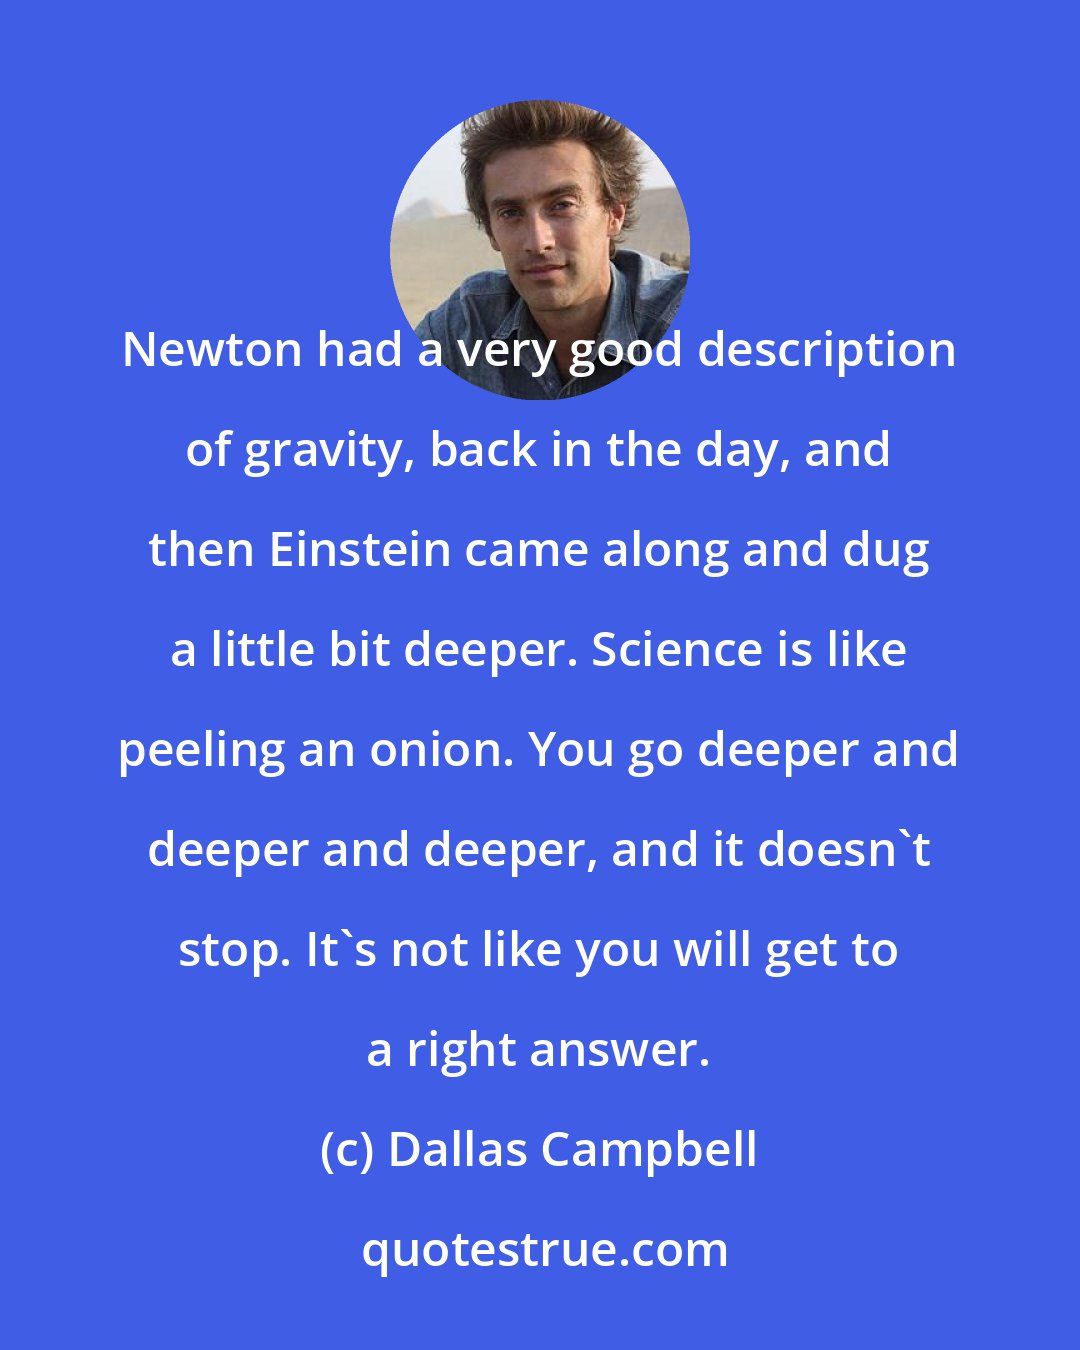 Dallas Campbell: Newton had a very good description of gravity, back in the day, and then Einstein came along and dug a little bit deeper. Science is like peeling an onion. You go deeper and deeper and deeper, and it doesn't stop. It's not like you will get to a right answer.